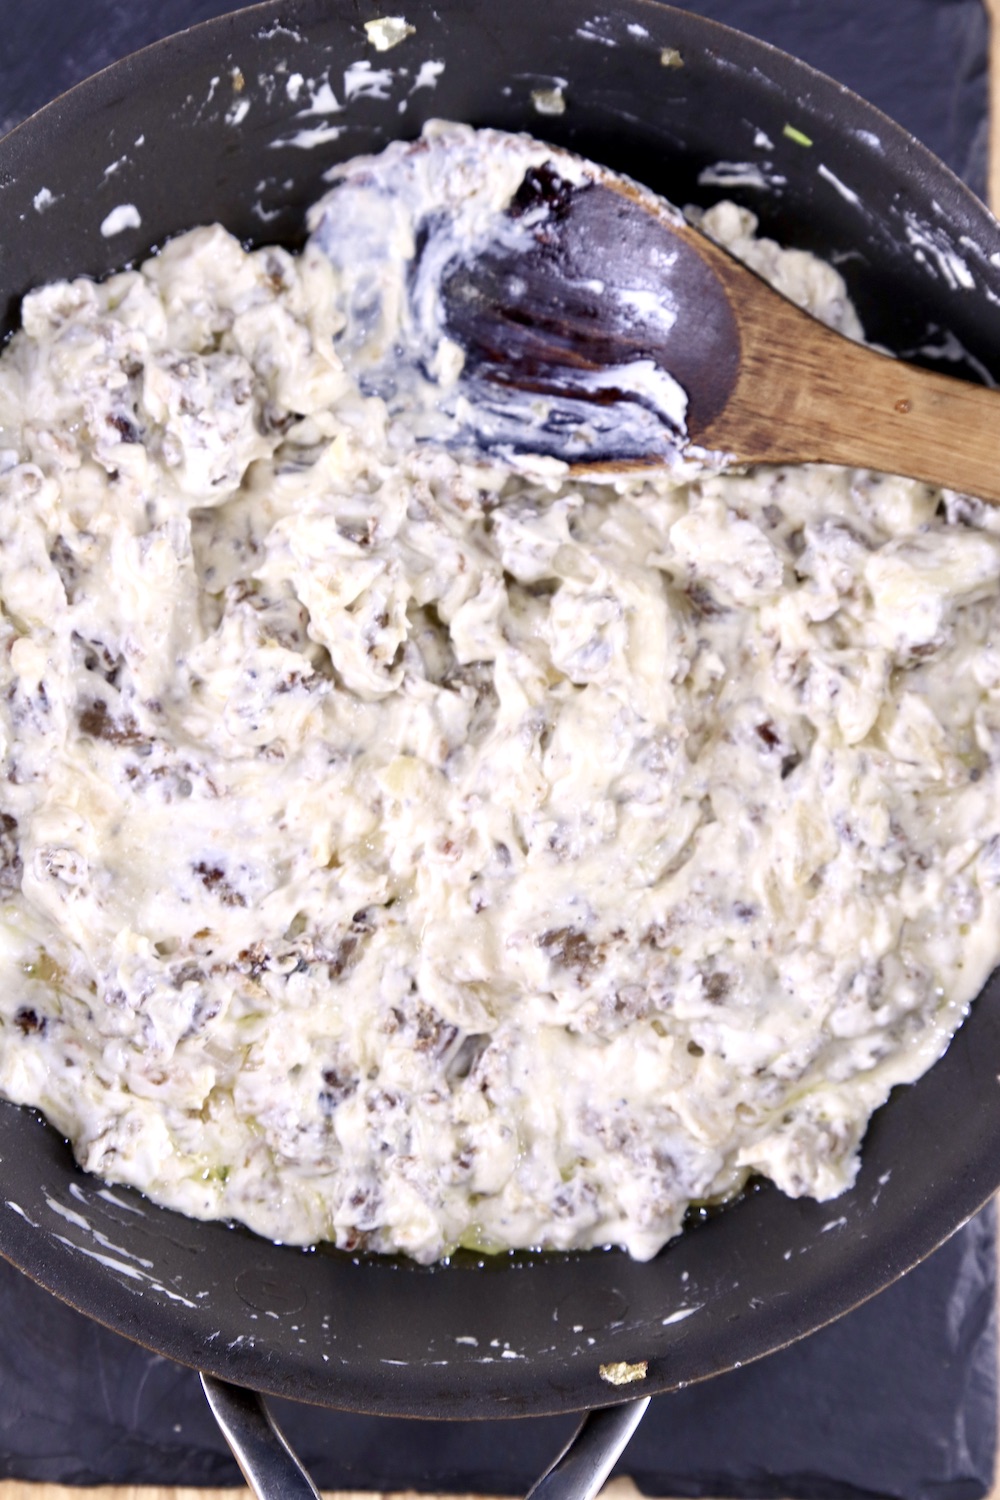 Sausage Cream cheese mixture for crescent rolls